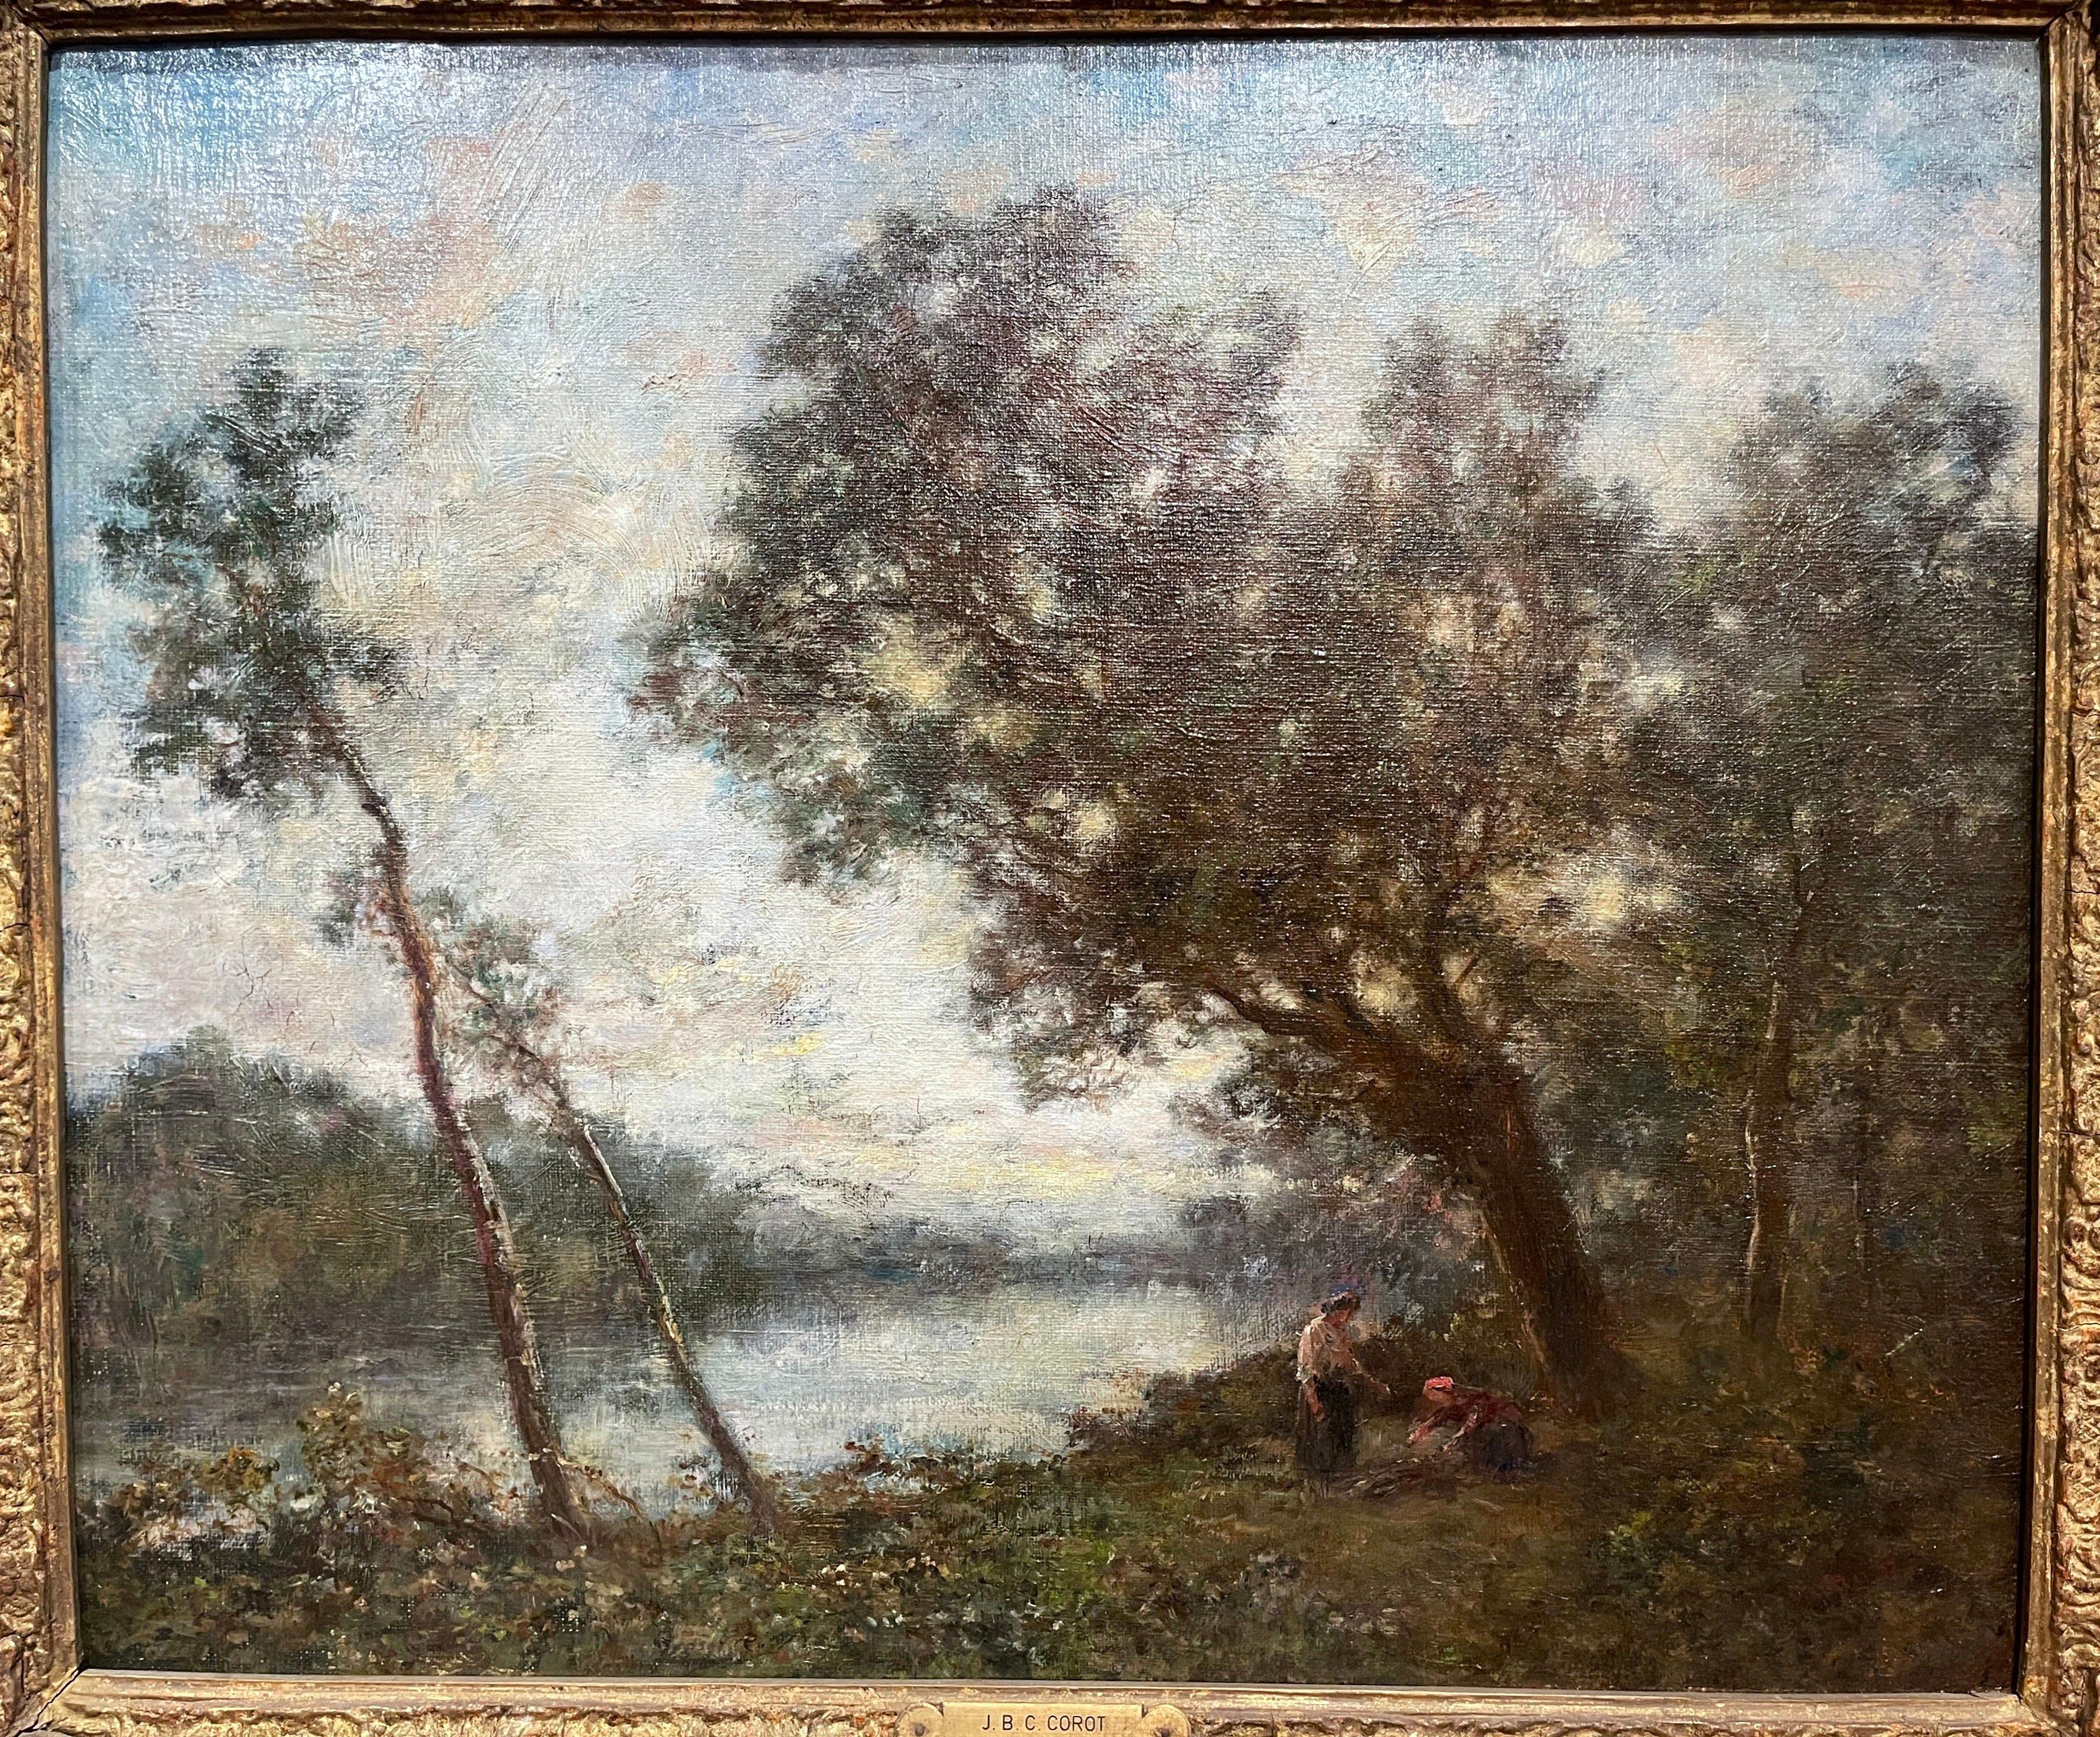 Decorate a dining room table or an office with this elegant antique French oil on canvas painting. Set in the original carved gilt frame, the art work depicts a pastoral scene with two women by the river surrounded with trees and landscape in the